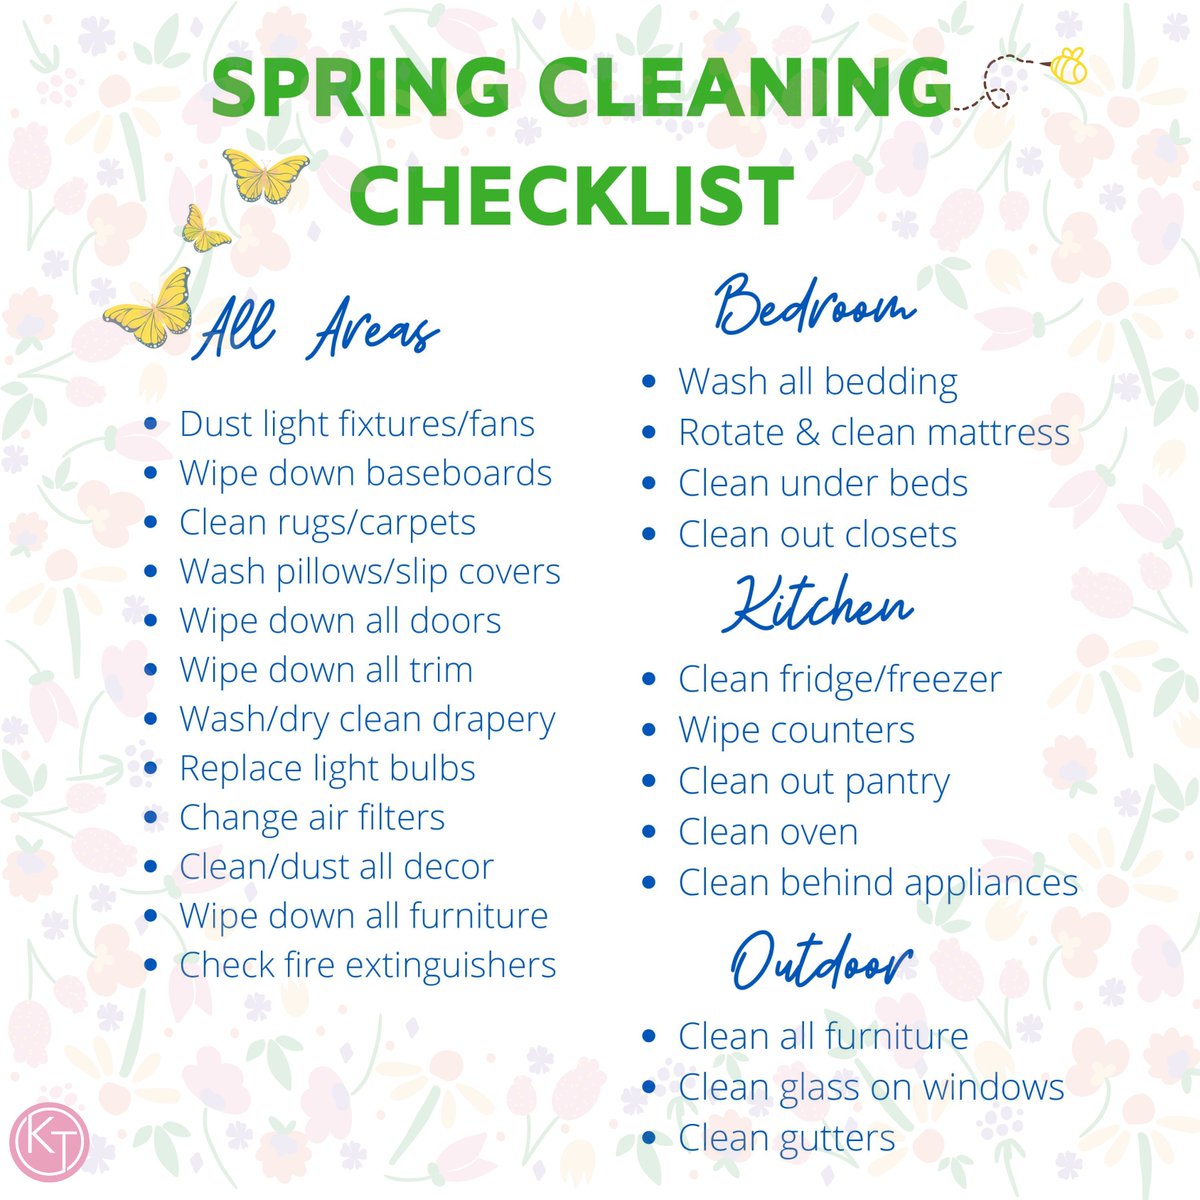 It’s time to start your Spring cleaning and let your home sparkle! 

#homeownership #realestate #realtor #homebuying #realestateagent #springcleaning #clean #spring #checklist #springflowers #springdecor #springtime #sonomarealestate #sonomacounty #sonoma #santarosa #homedecor